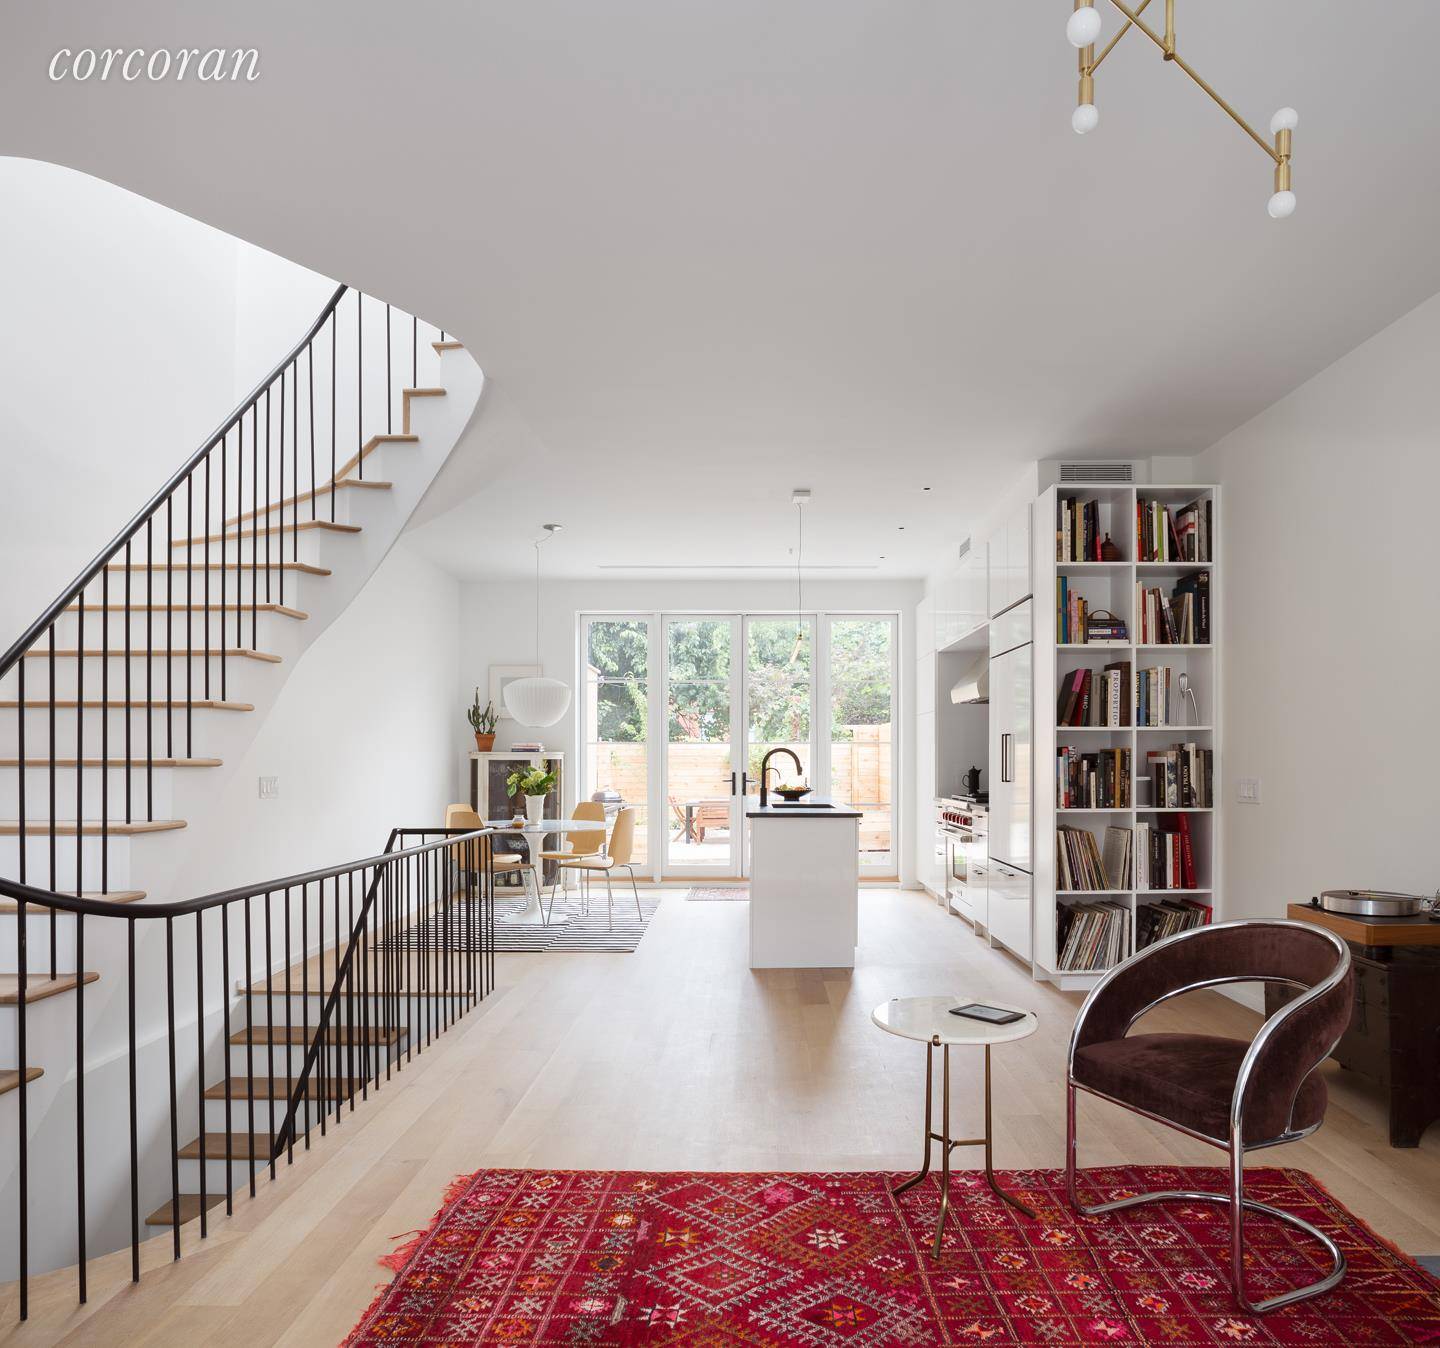 Professionally designed, quality crafted and entirely rebuilt from the ground up with no detail spared, 467 Carroll Street is a thoughtfully designed Single Family haven in the heart of Brooklyn's ...